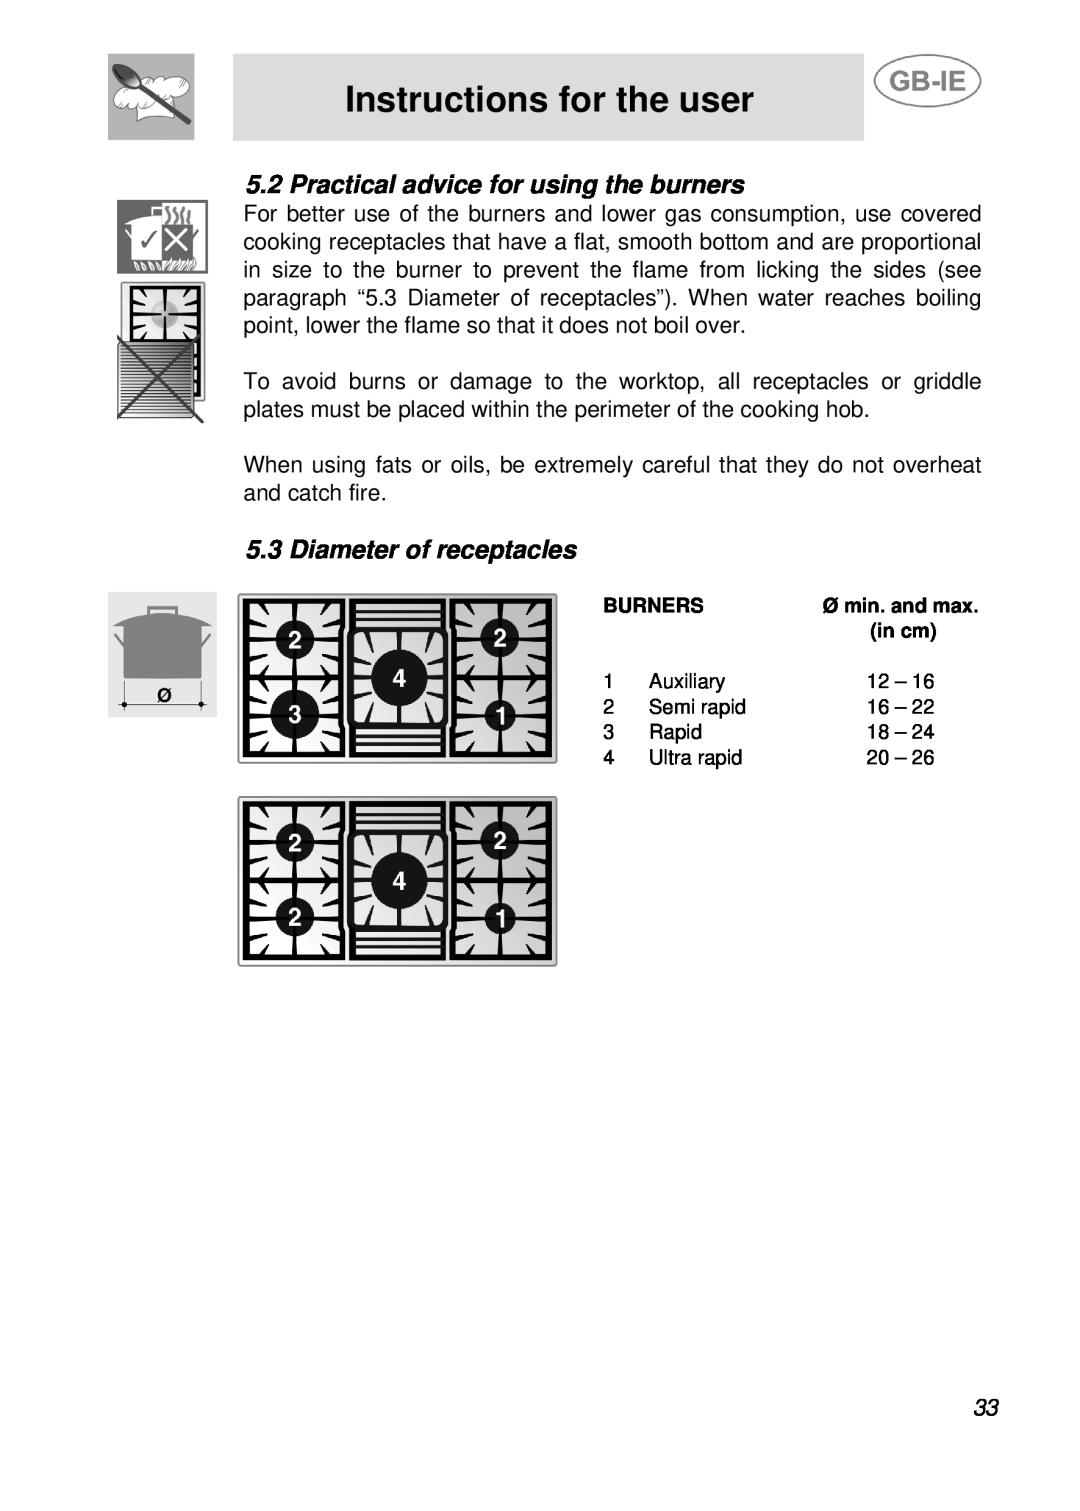 Smeg PGF95-1, PGF95F-1 Practical advice for using the burners, Diameter of receptacles, Instructions for the user, Burners 